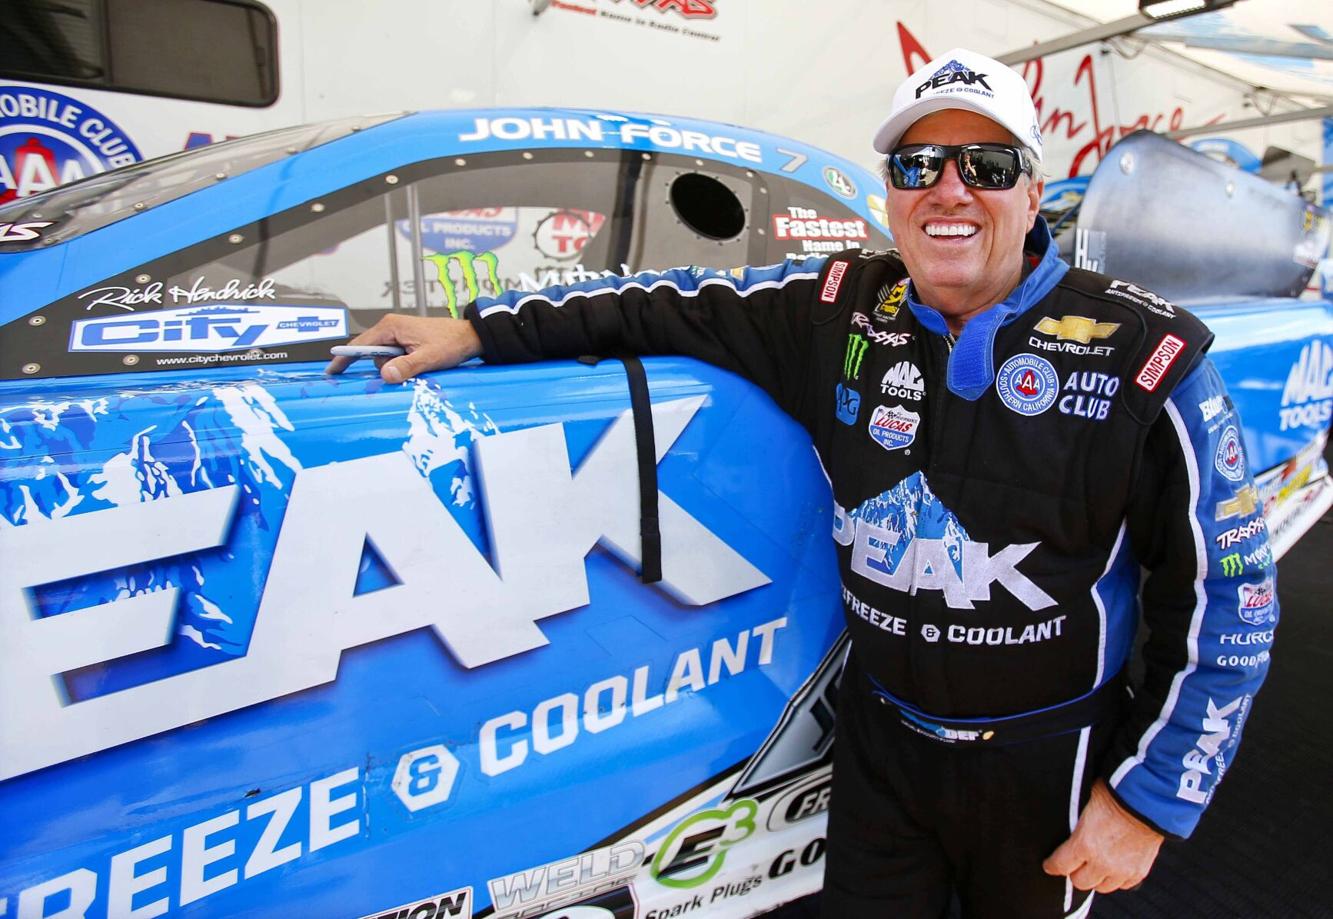 75yearold John Force races to record 157th NHRA victory at New